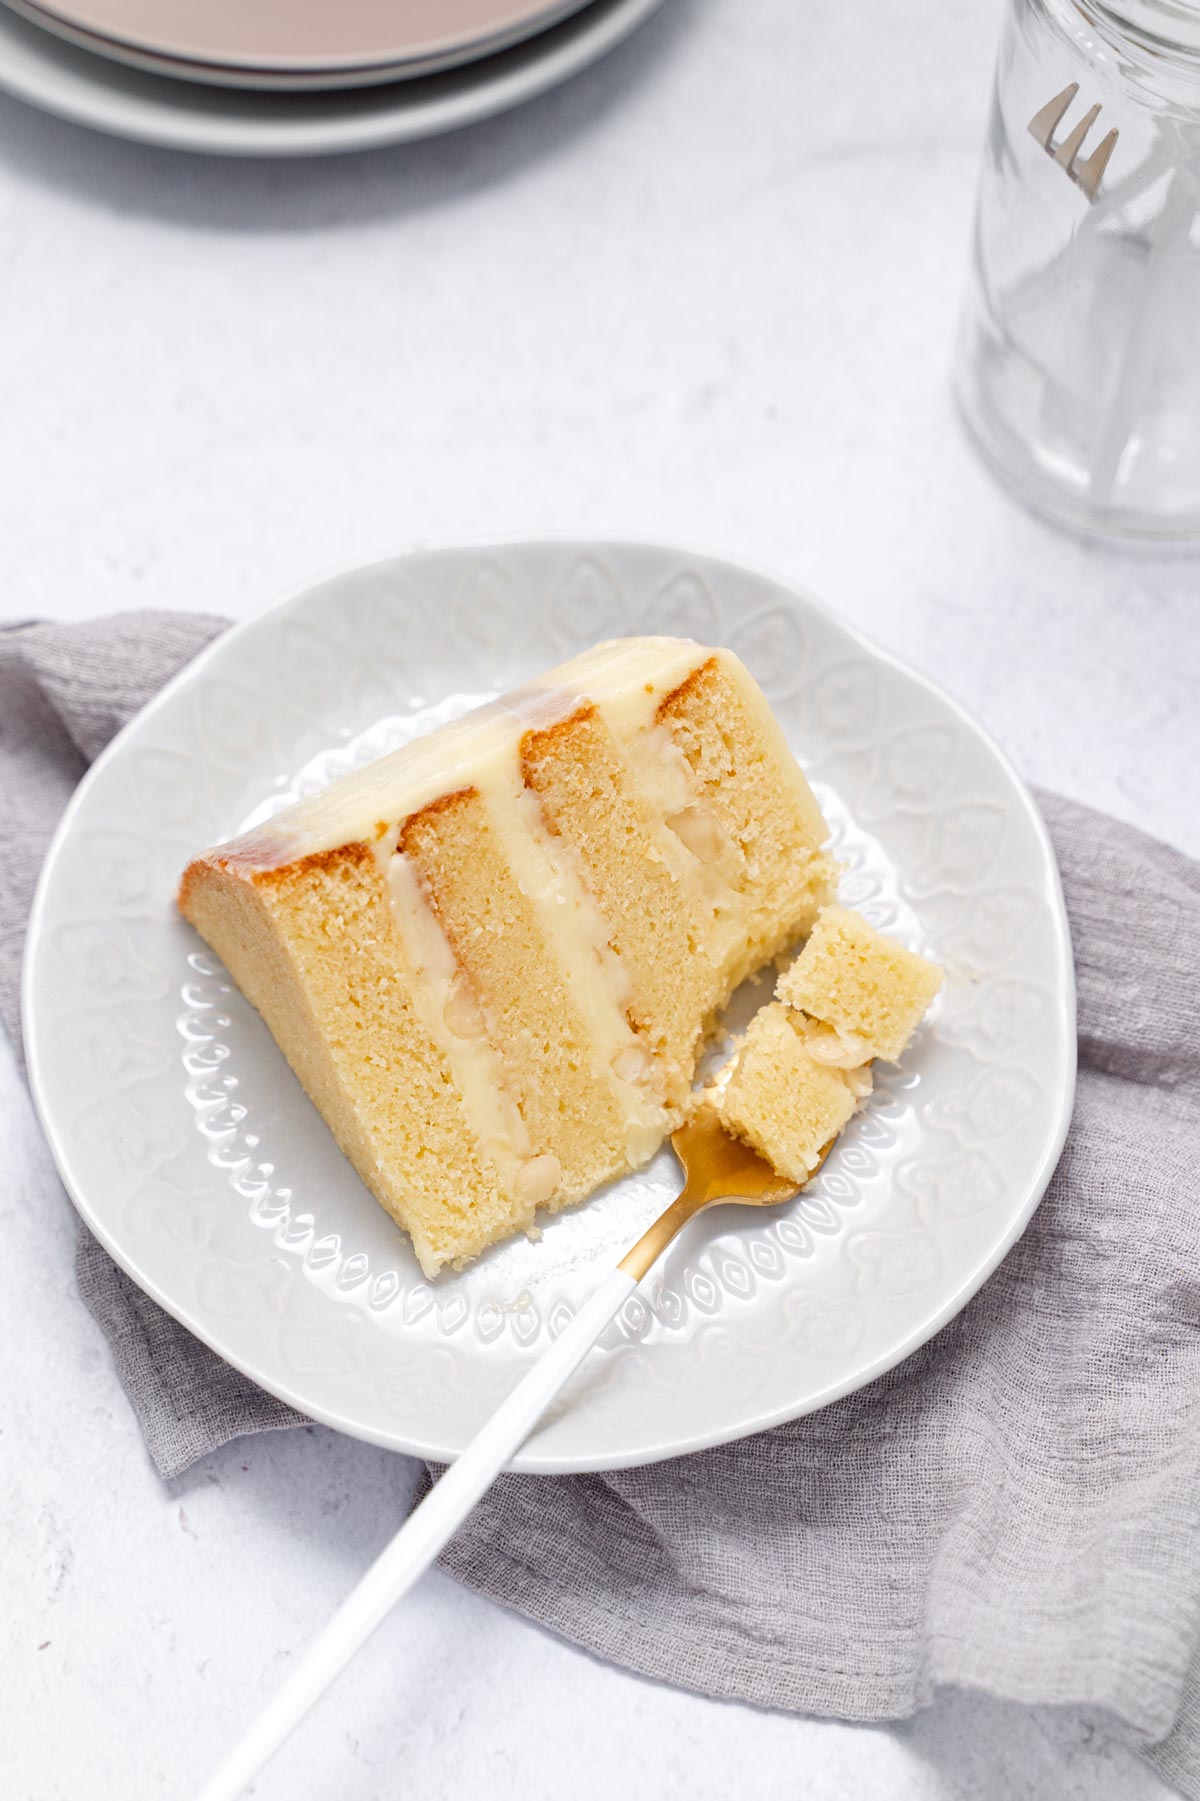 white chocolate macadamia nut cake slice with fork taking piece out